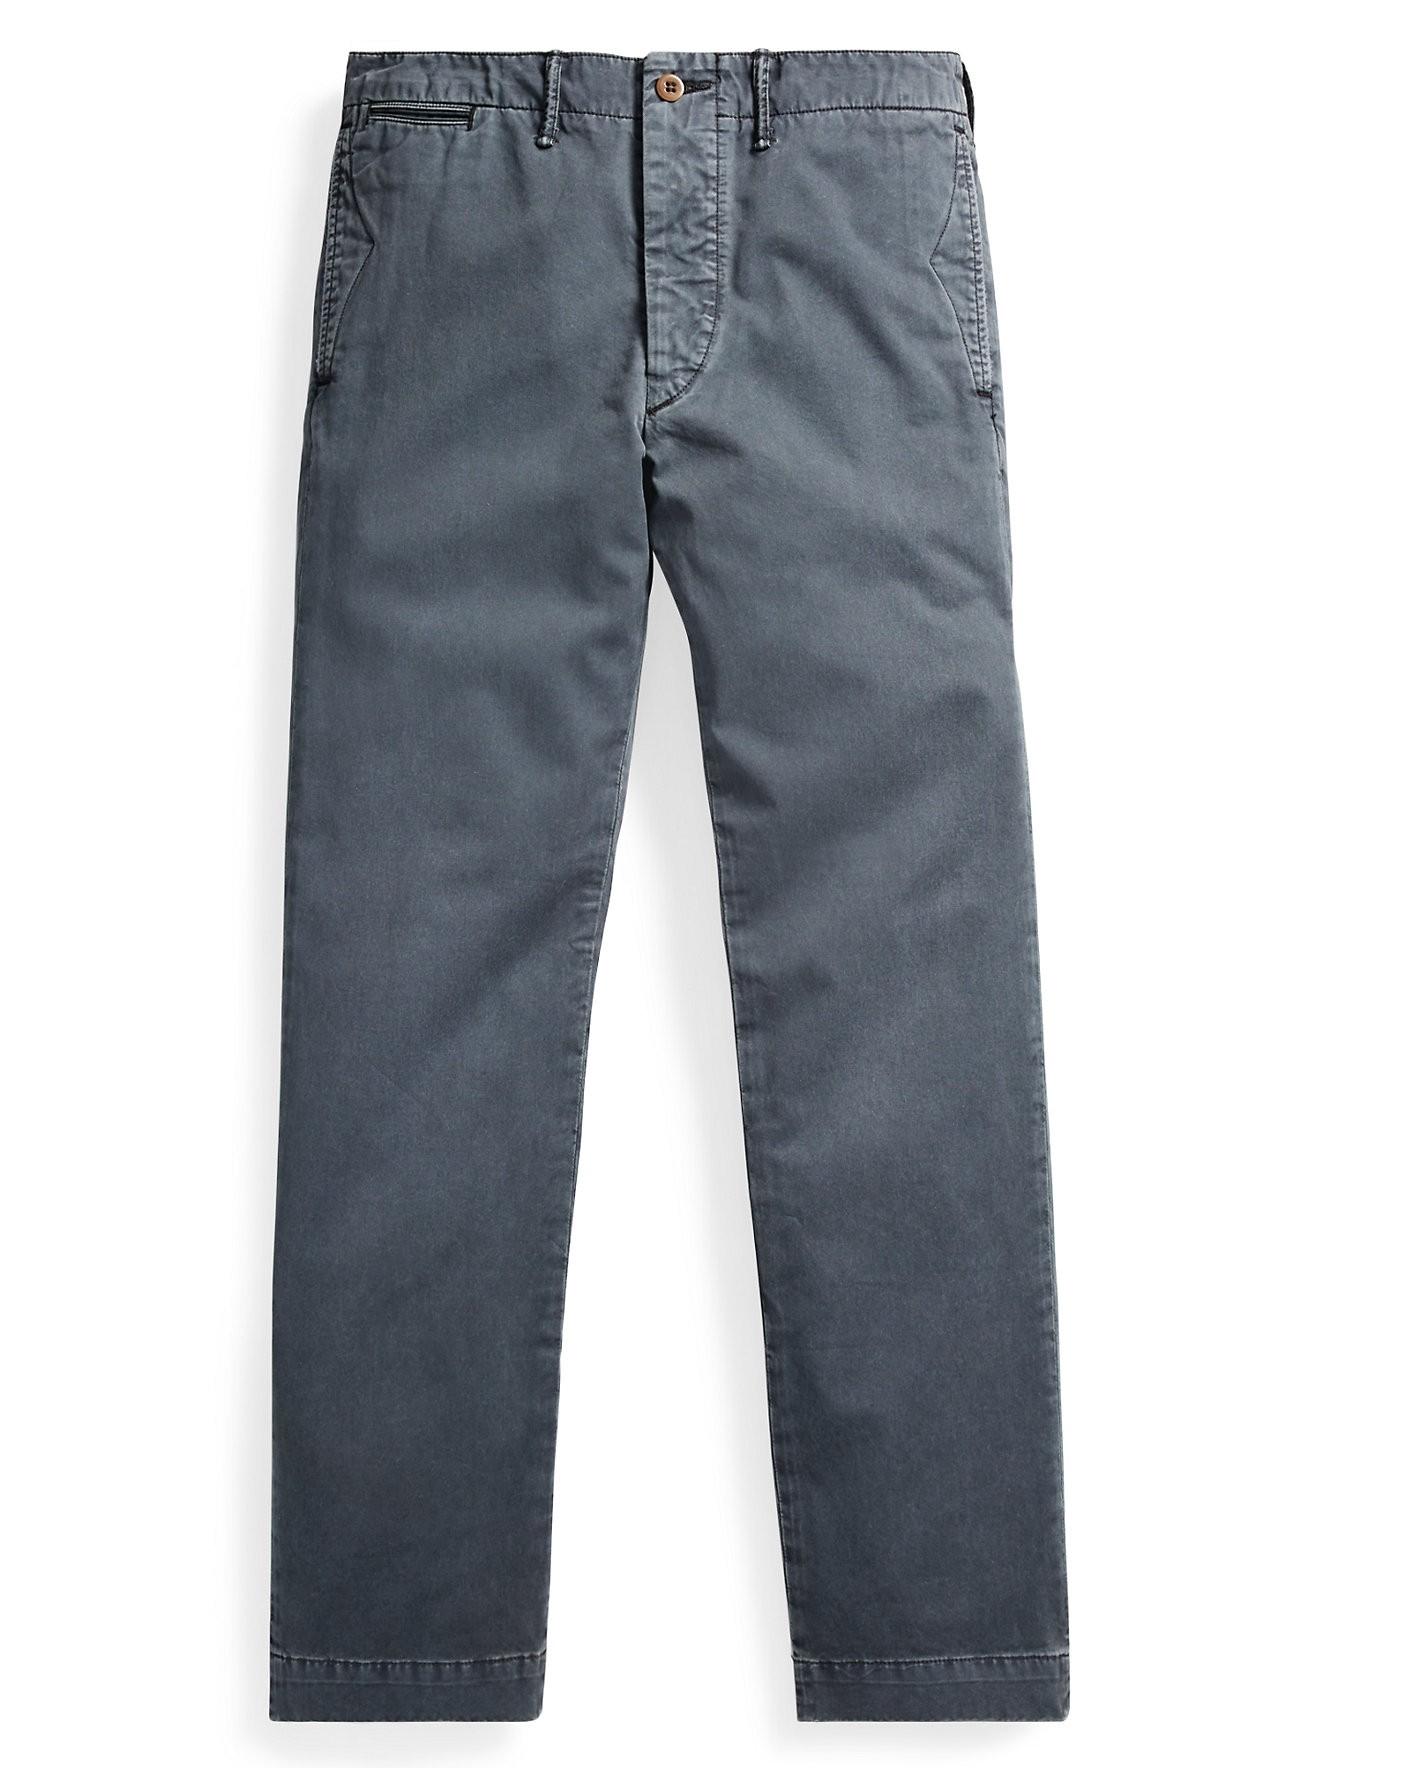 rrl cotton officer's chino